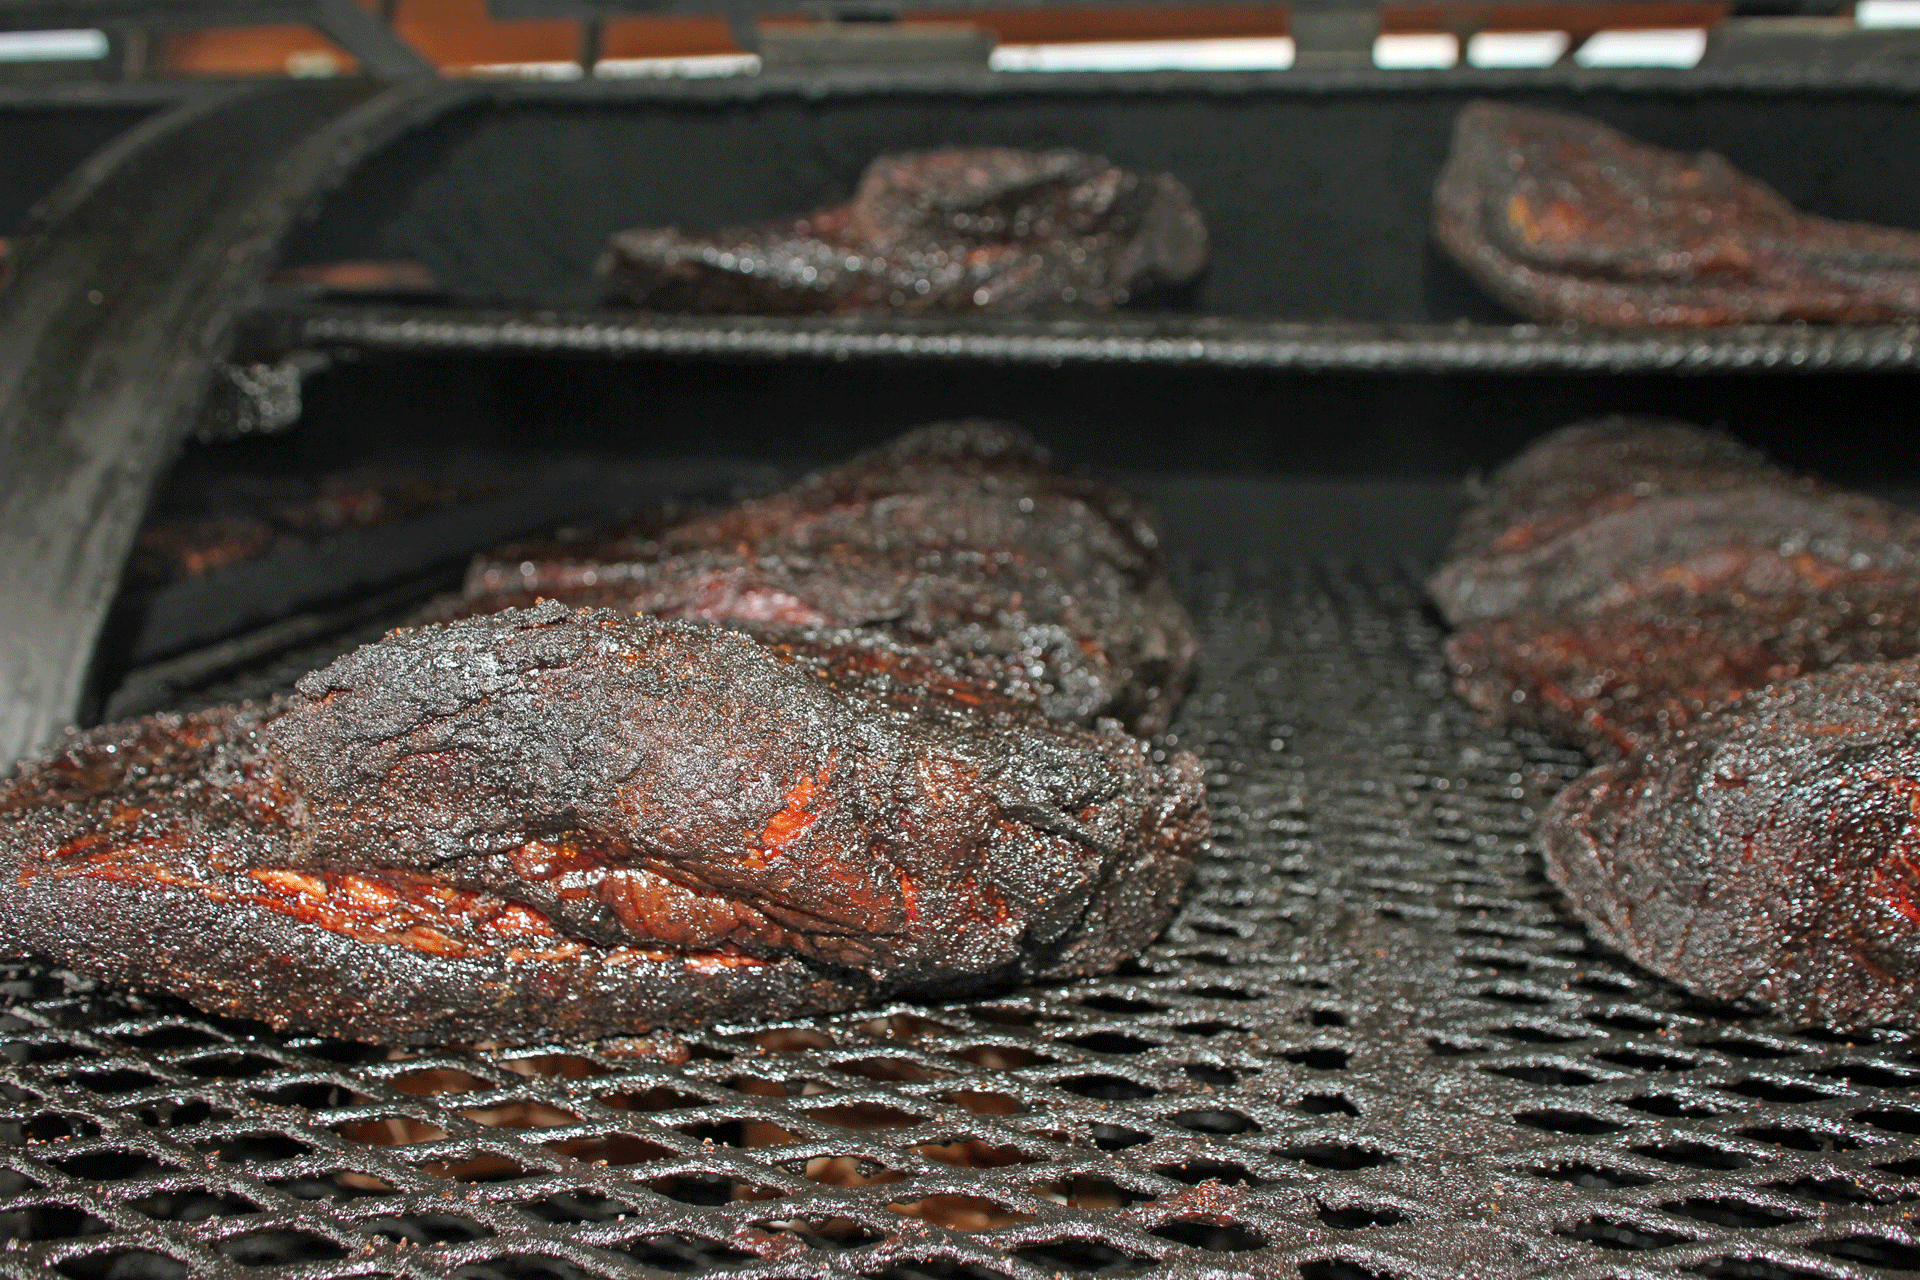 Jack’s pecializes in Texas-style barbecue.